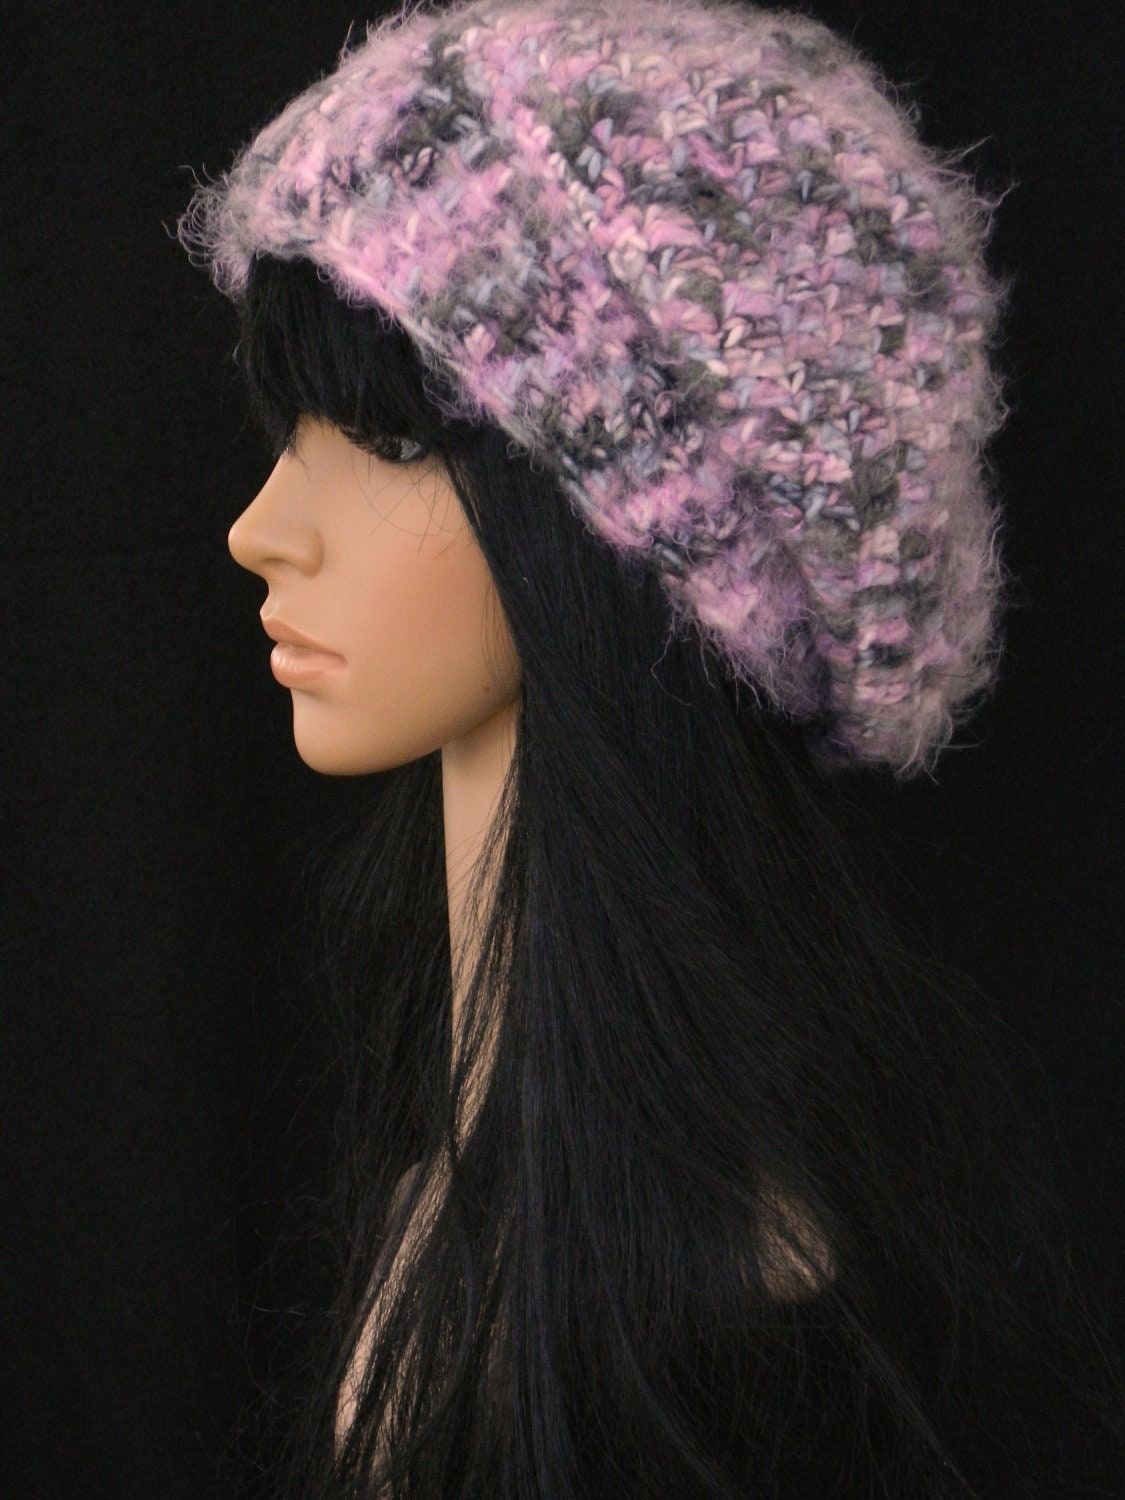 Winter Slouchy Cloche Headwarmers Tams Berets For Women Teens In Pink Black and Multicolored